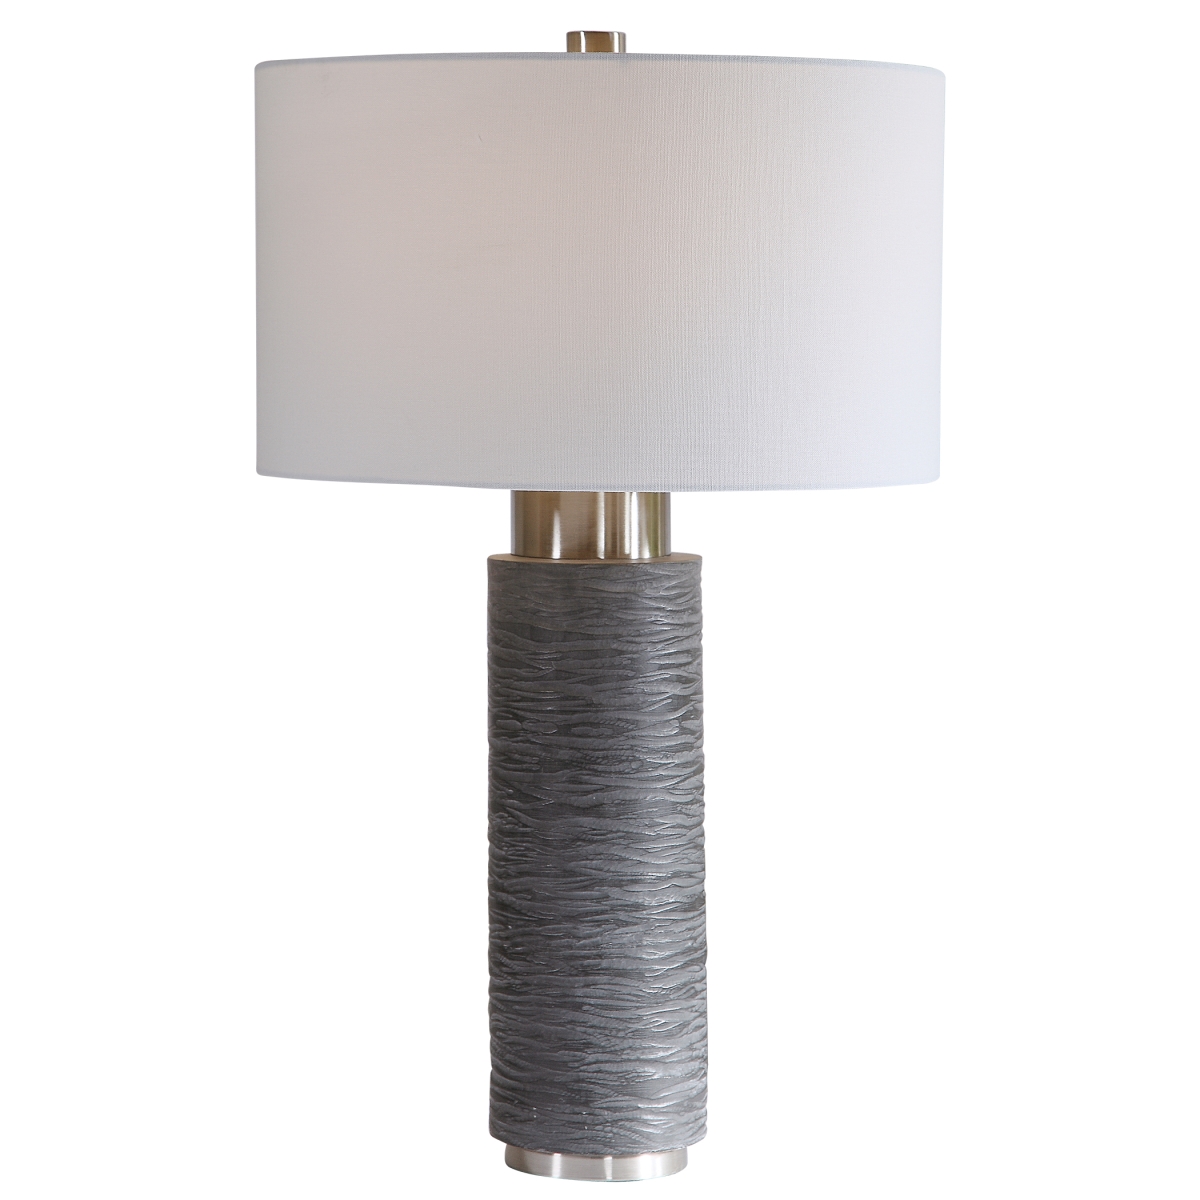 Picture of 212 Main 26357 Strathmore Stone Gray Table Lamp